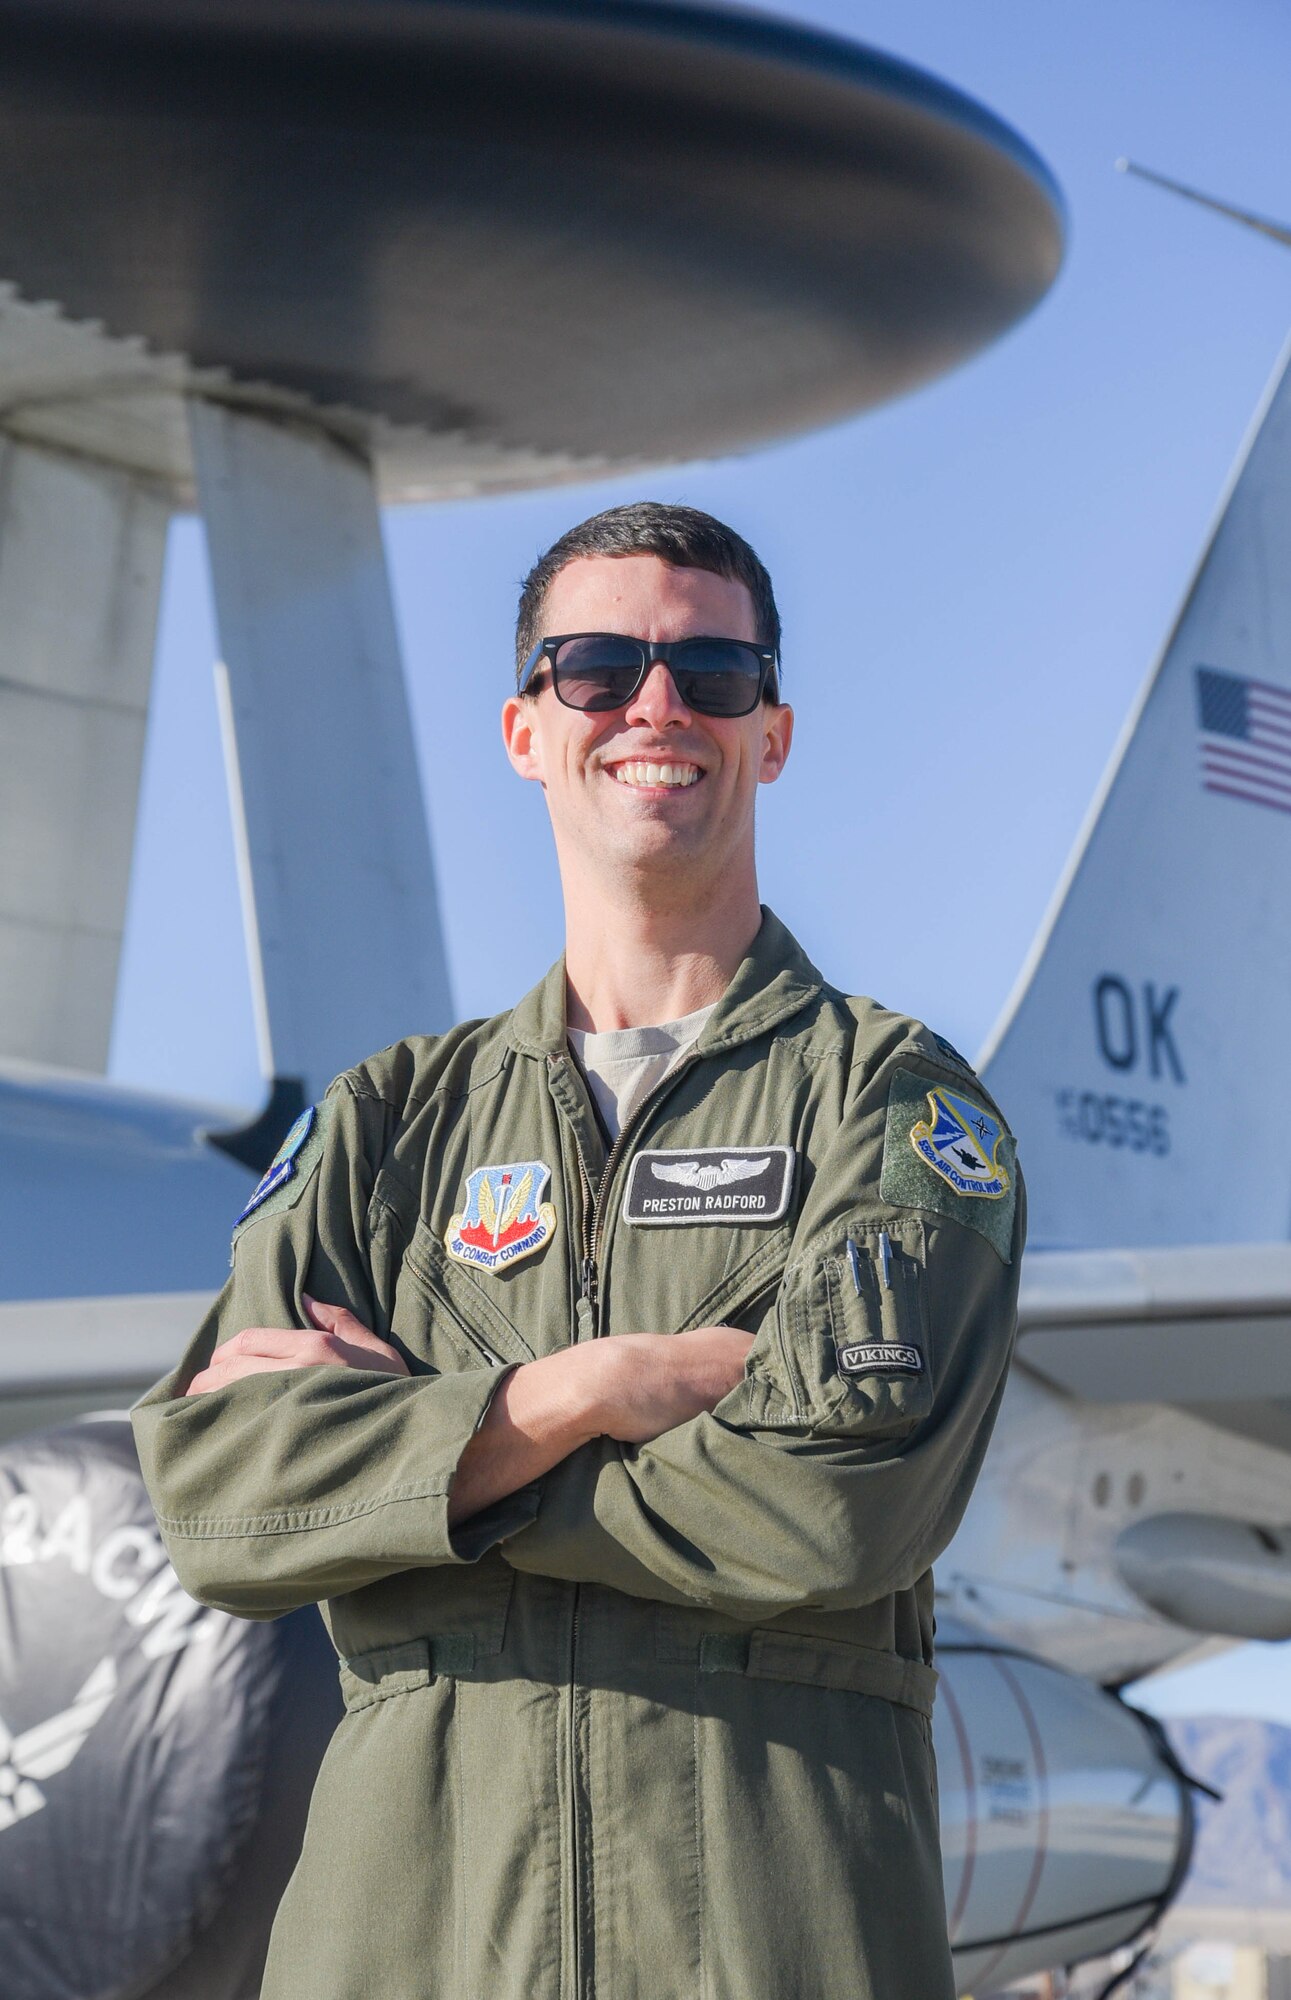 Capt. Preston Radford, an Airborne Warning and Control System instructor pilot with the 960th Airborne Air Control Squadron based out of Tinker Air Force Base, made history during RED FLAG 20-1 when he was selected to serve as mission commander. While RED FLAG has been operating out of Nellis AFB quarterly since 1975, this marks the third time in the exercise’s history that an AWACS pilot has been selected to serve as mission commander.